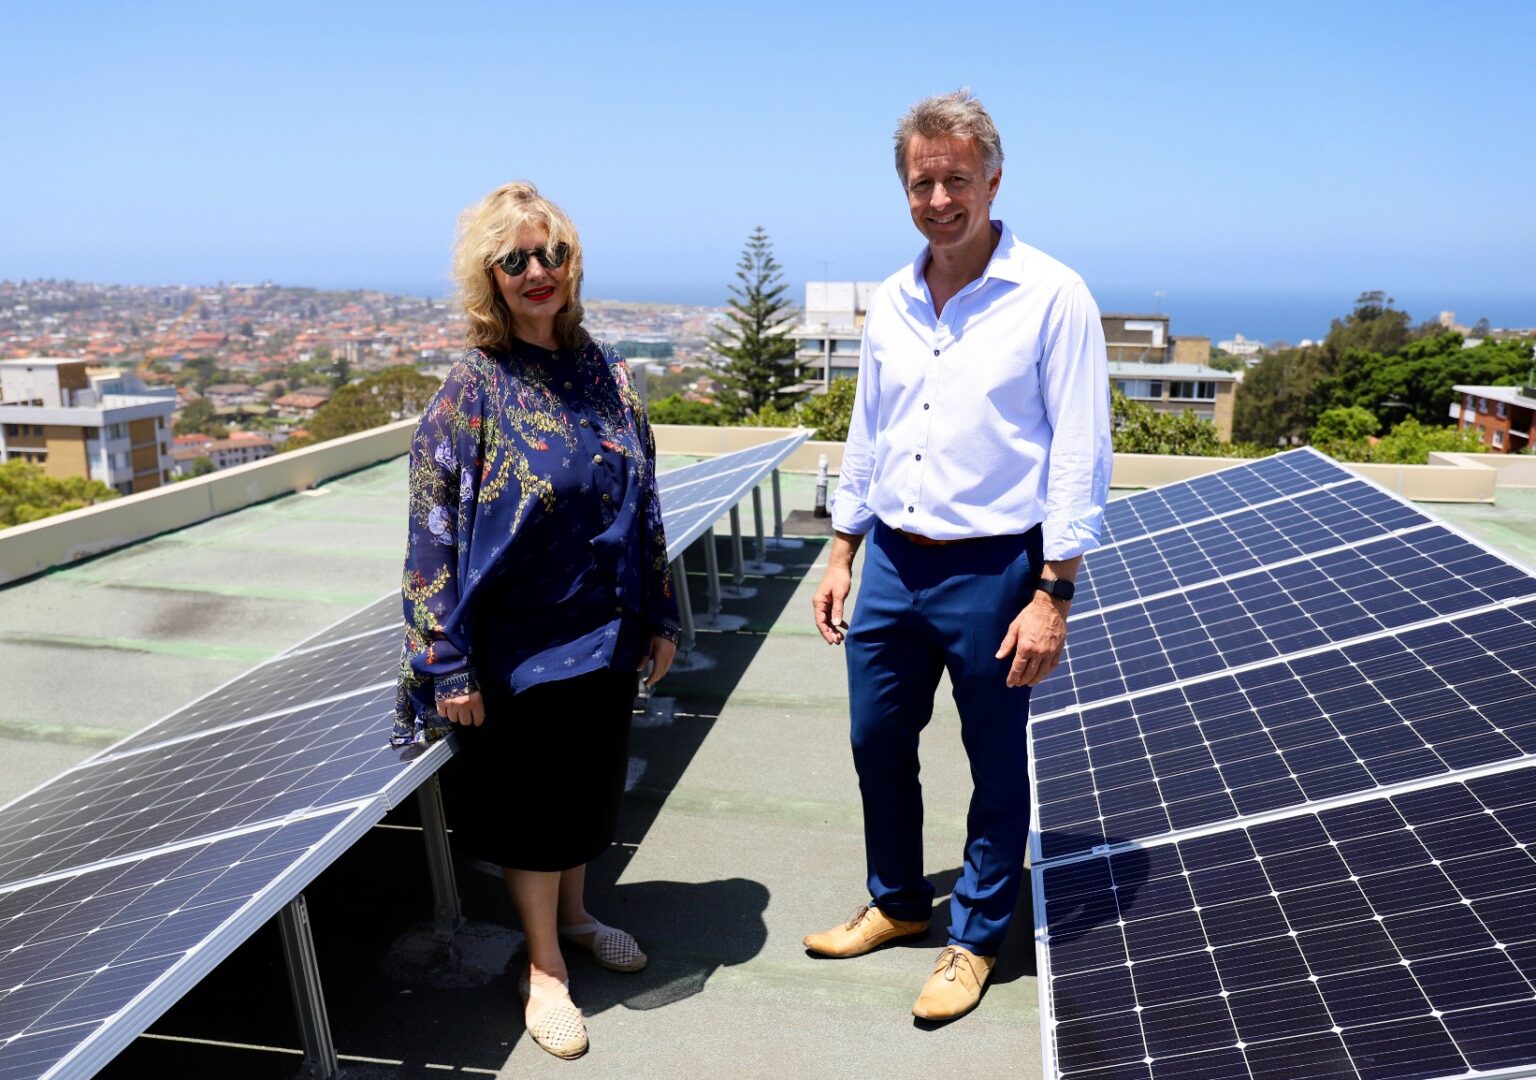 Woollahra, Waverley and Inner West councils all sign up to $180 million renewable energy deal